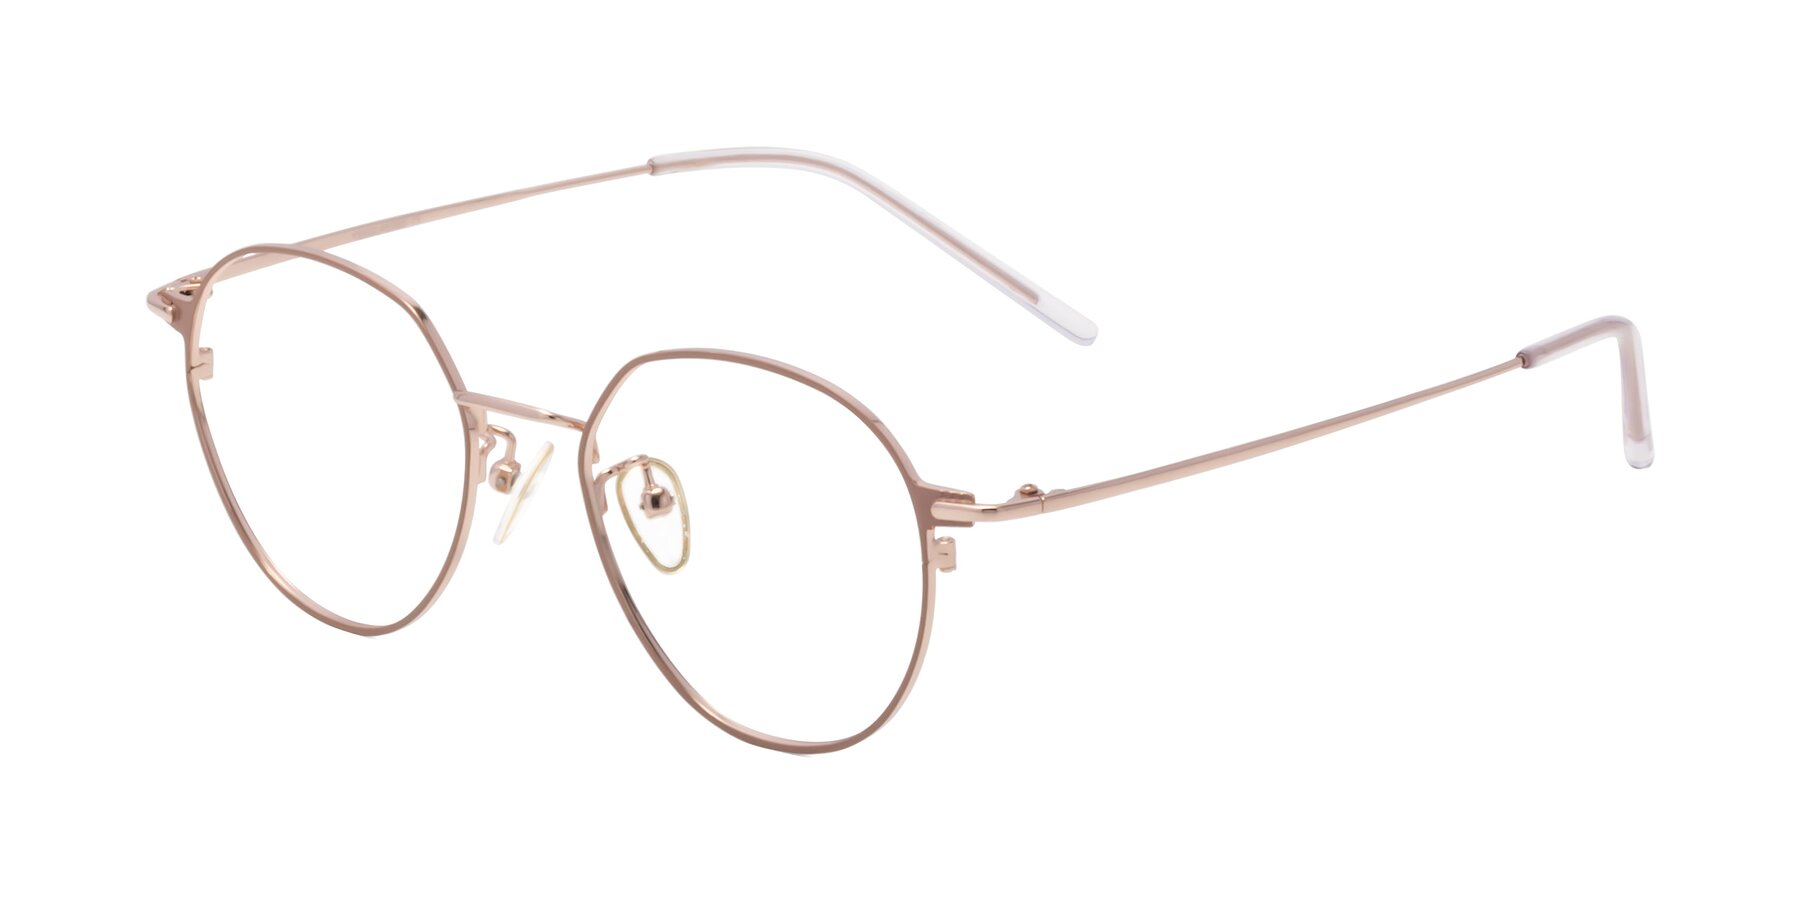 Angle of 18006 in Pink-Rose Gold with Clear Eyeglass Lenses